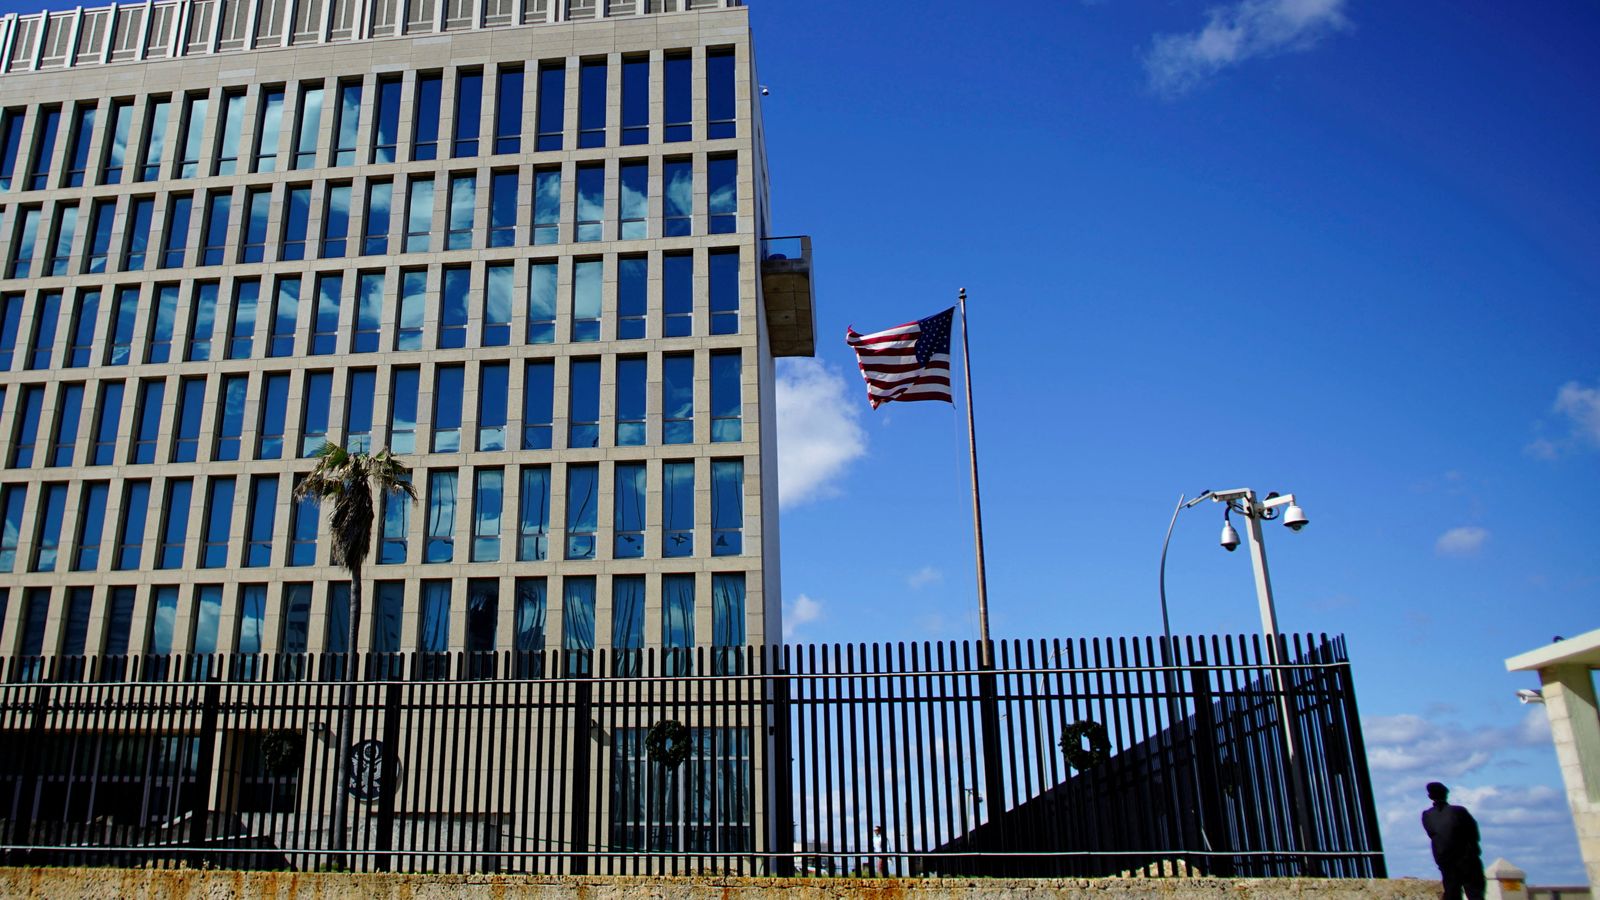 Electromagnetic energy pulses could be behind Havana Syndrome illness affecting US diplomats and spies